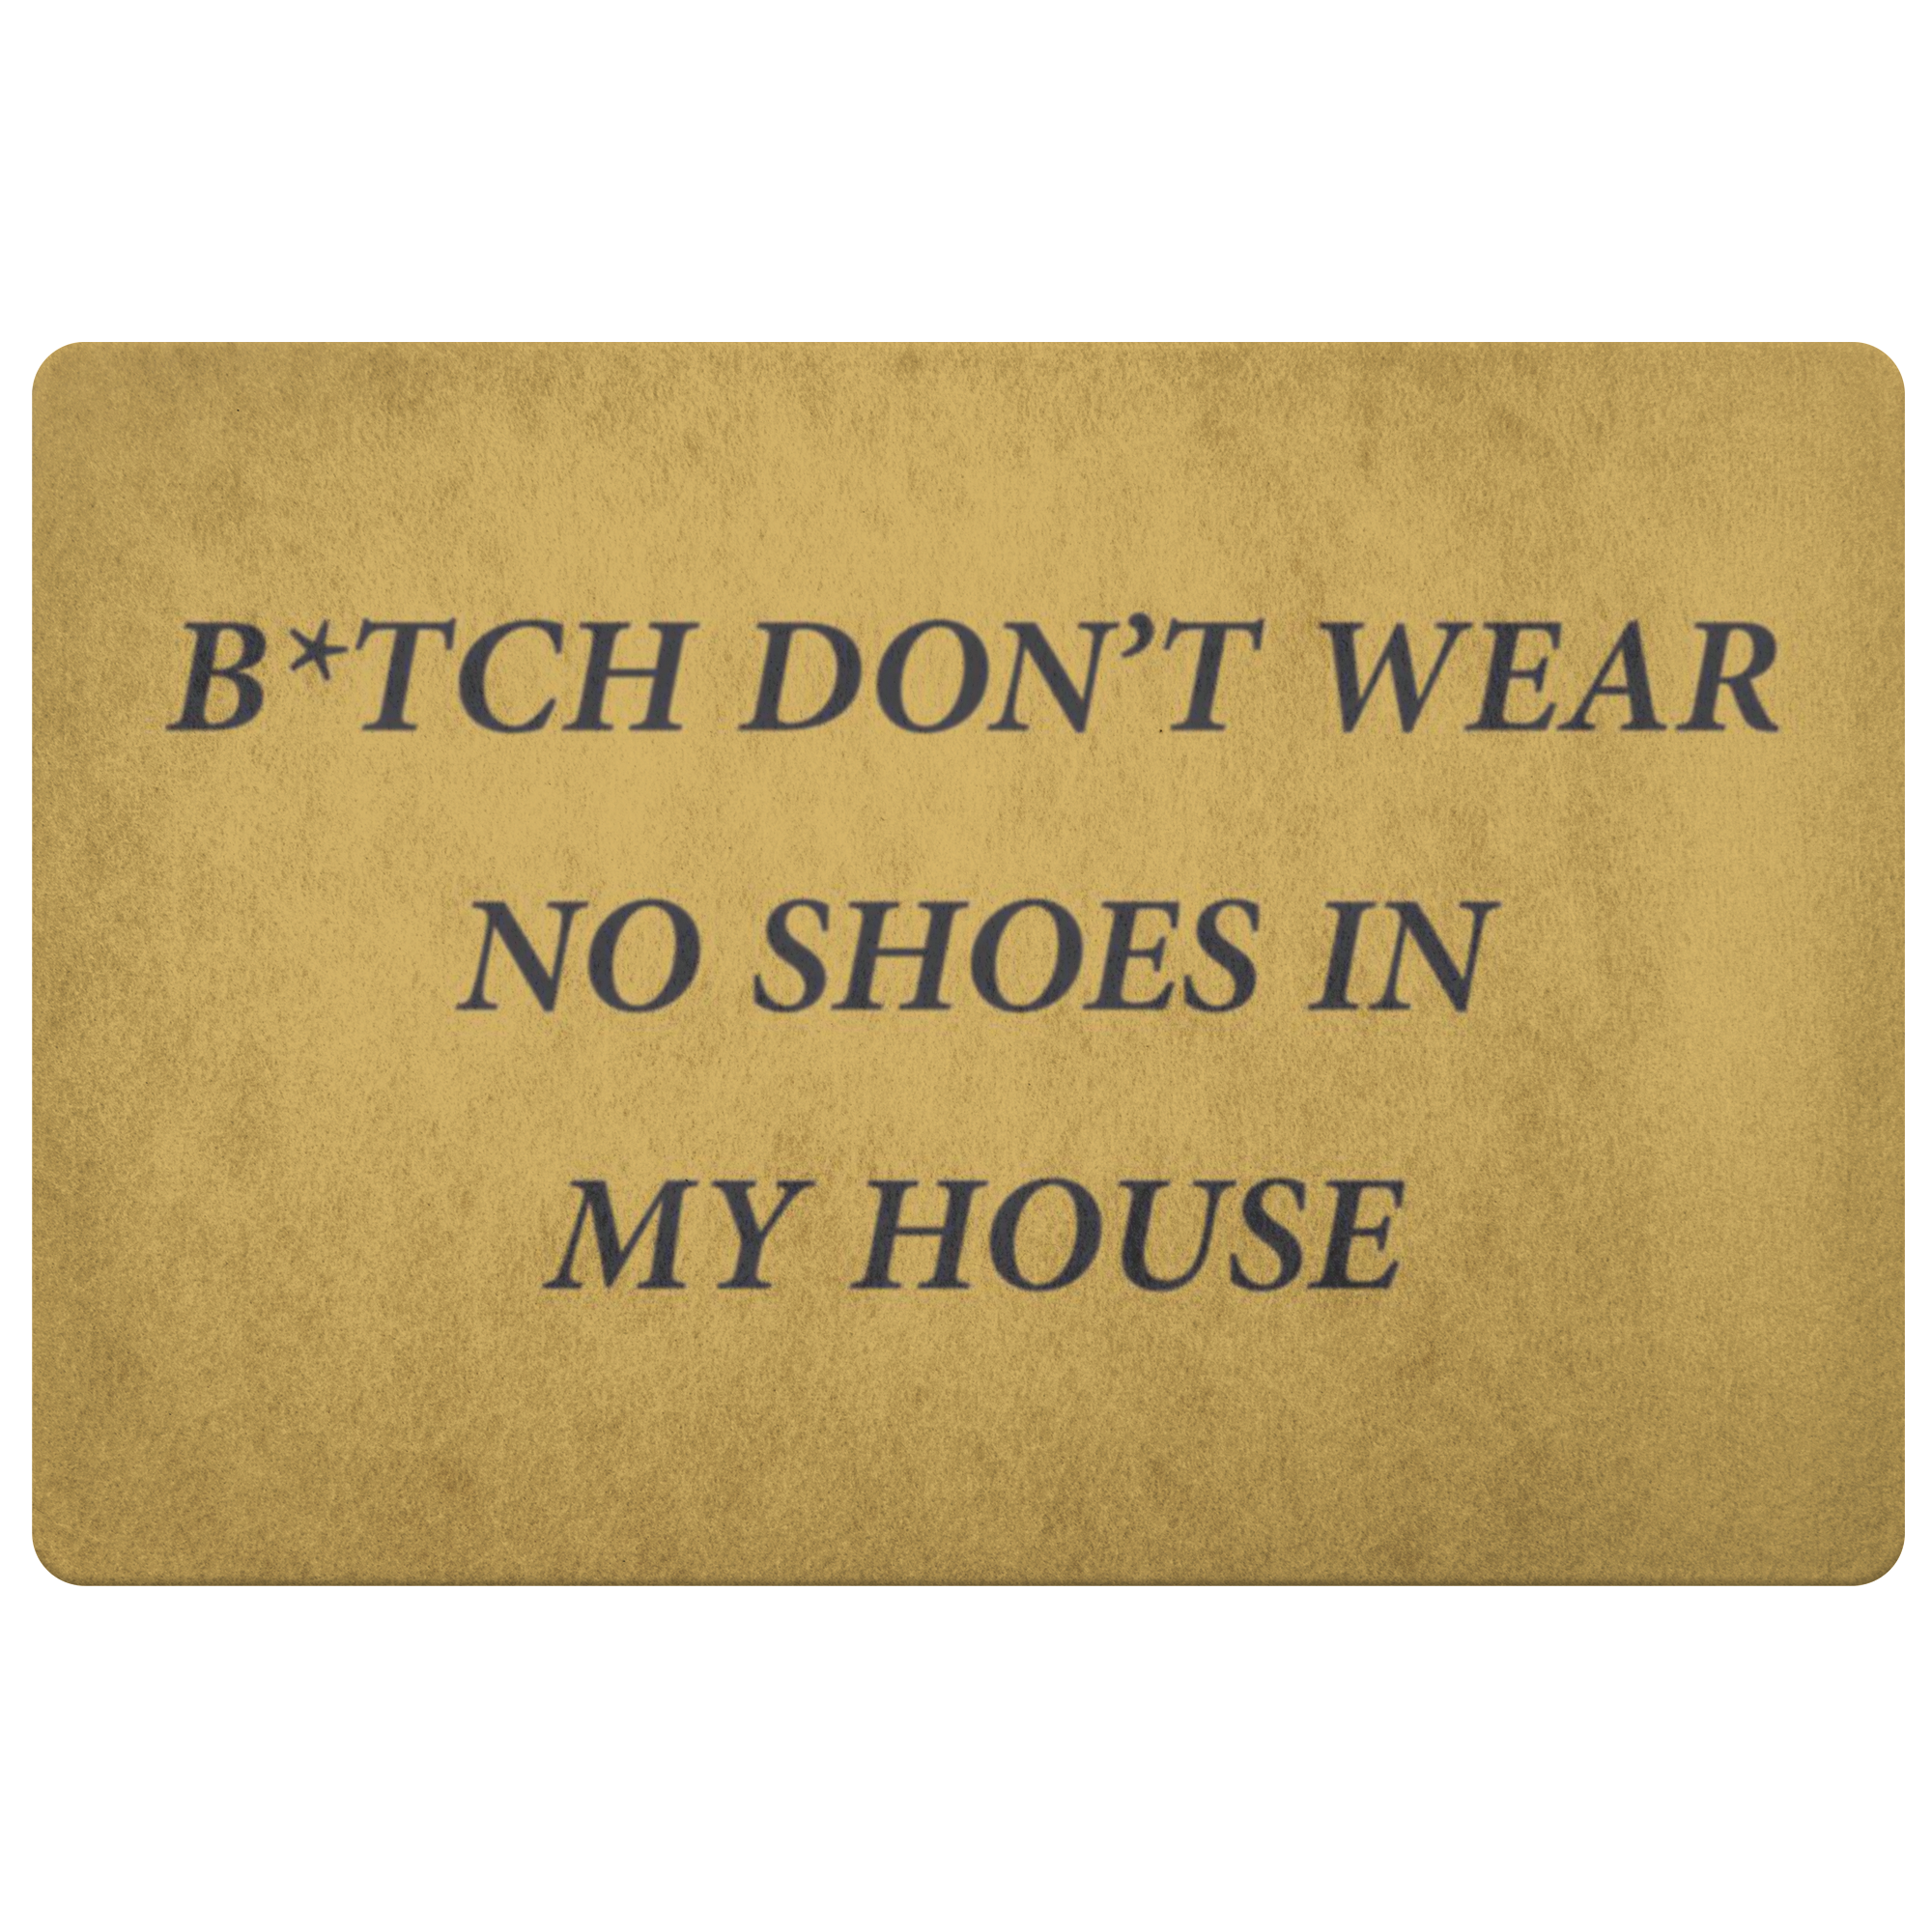 B*tch don't wear No shoes In My House Doormat